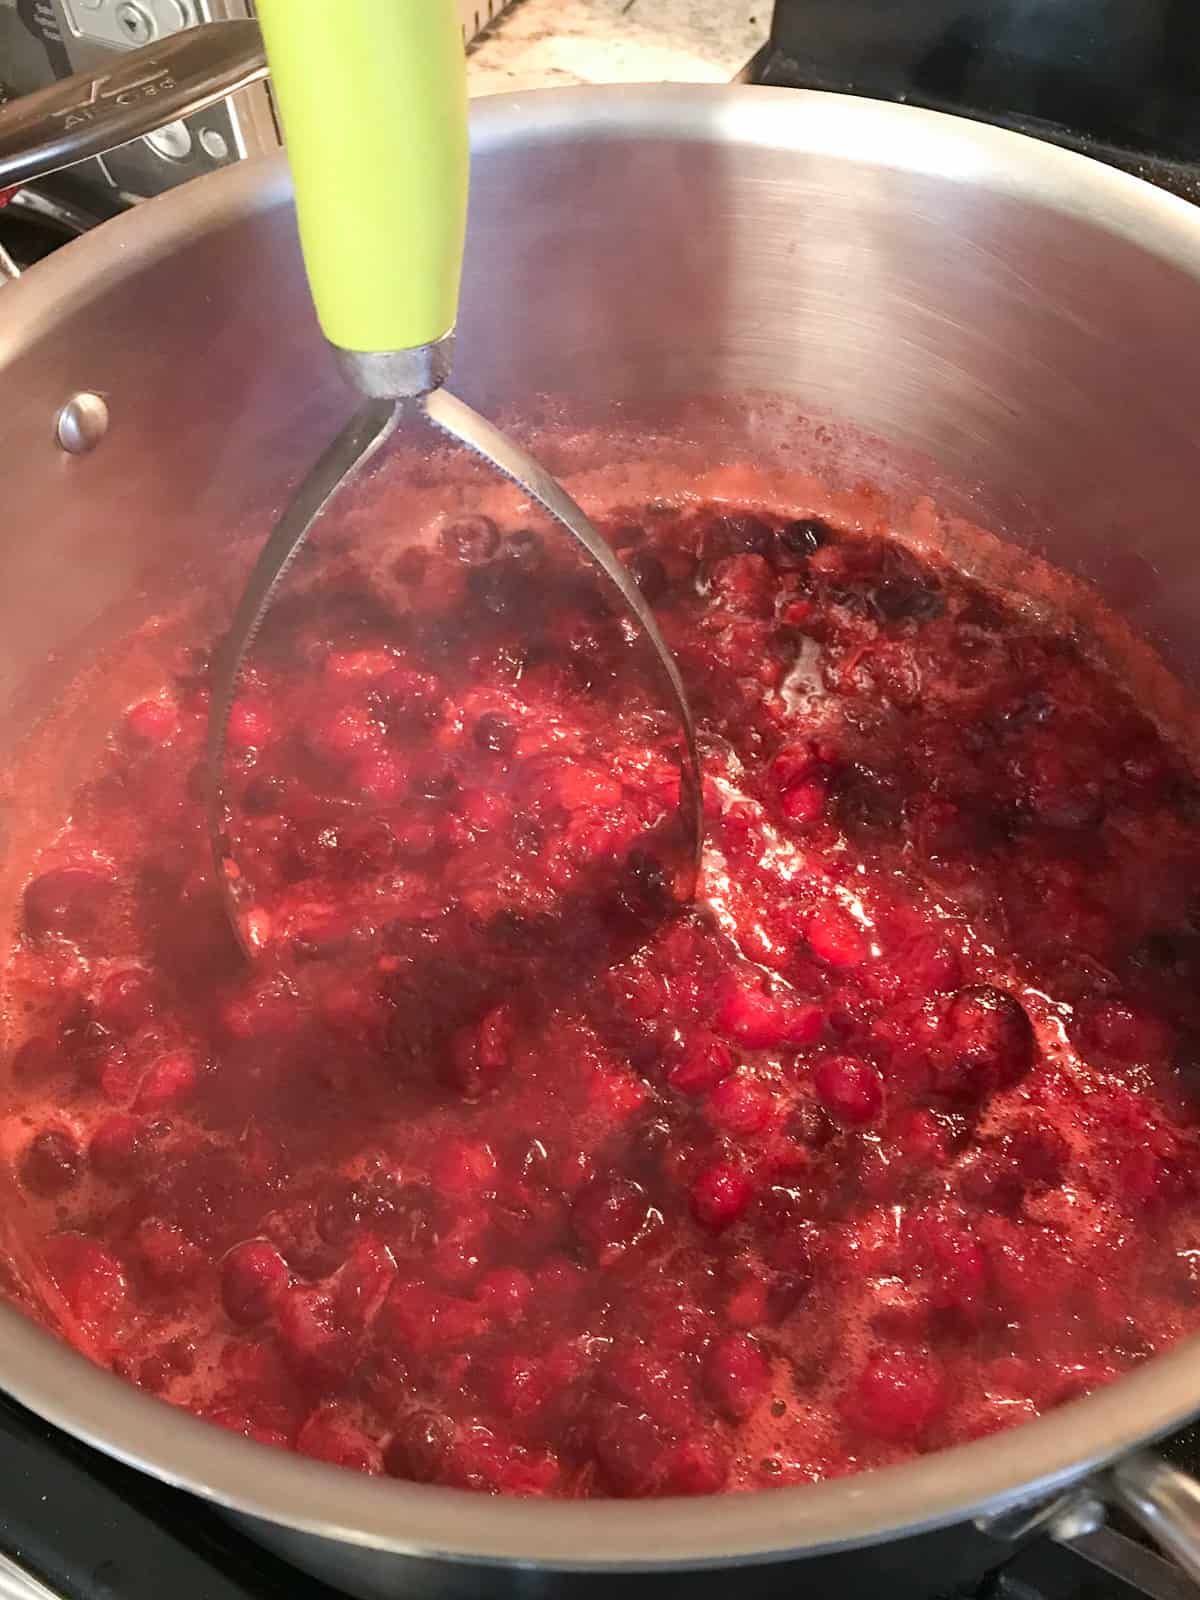 Mashing cooked cranberries with a potato masher.